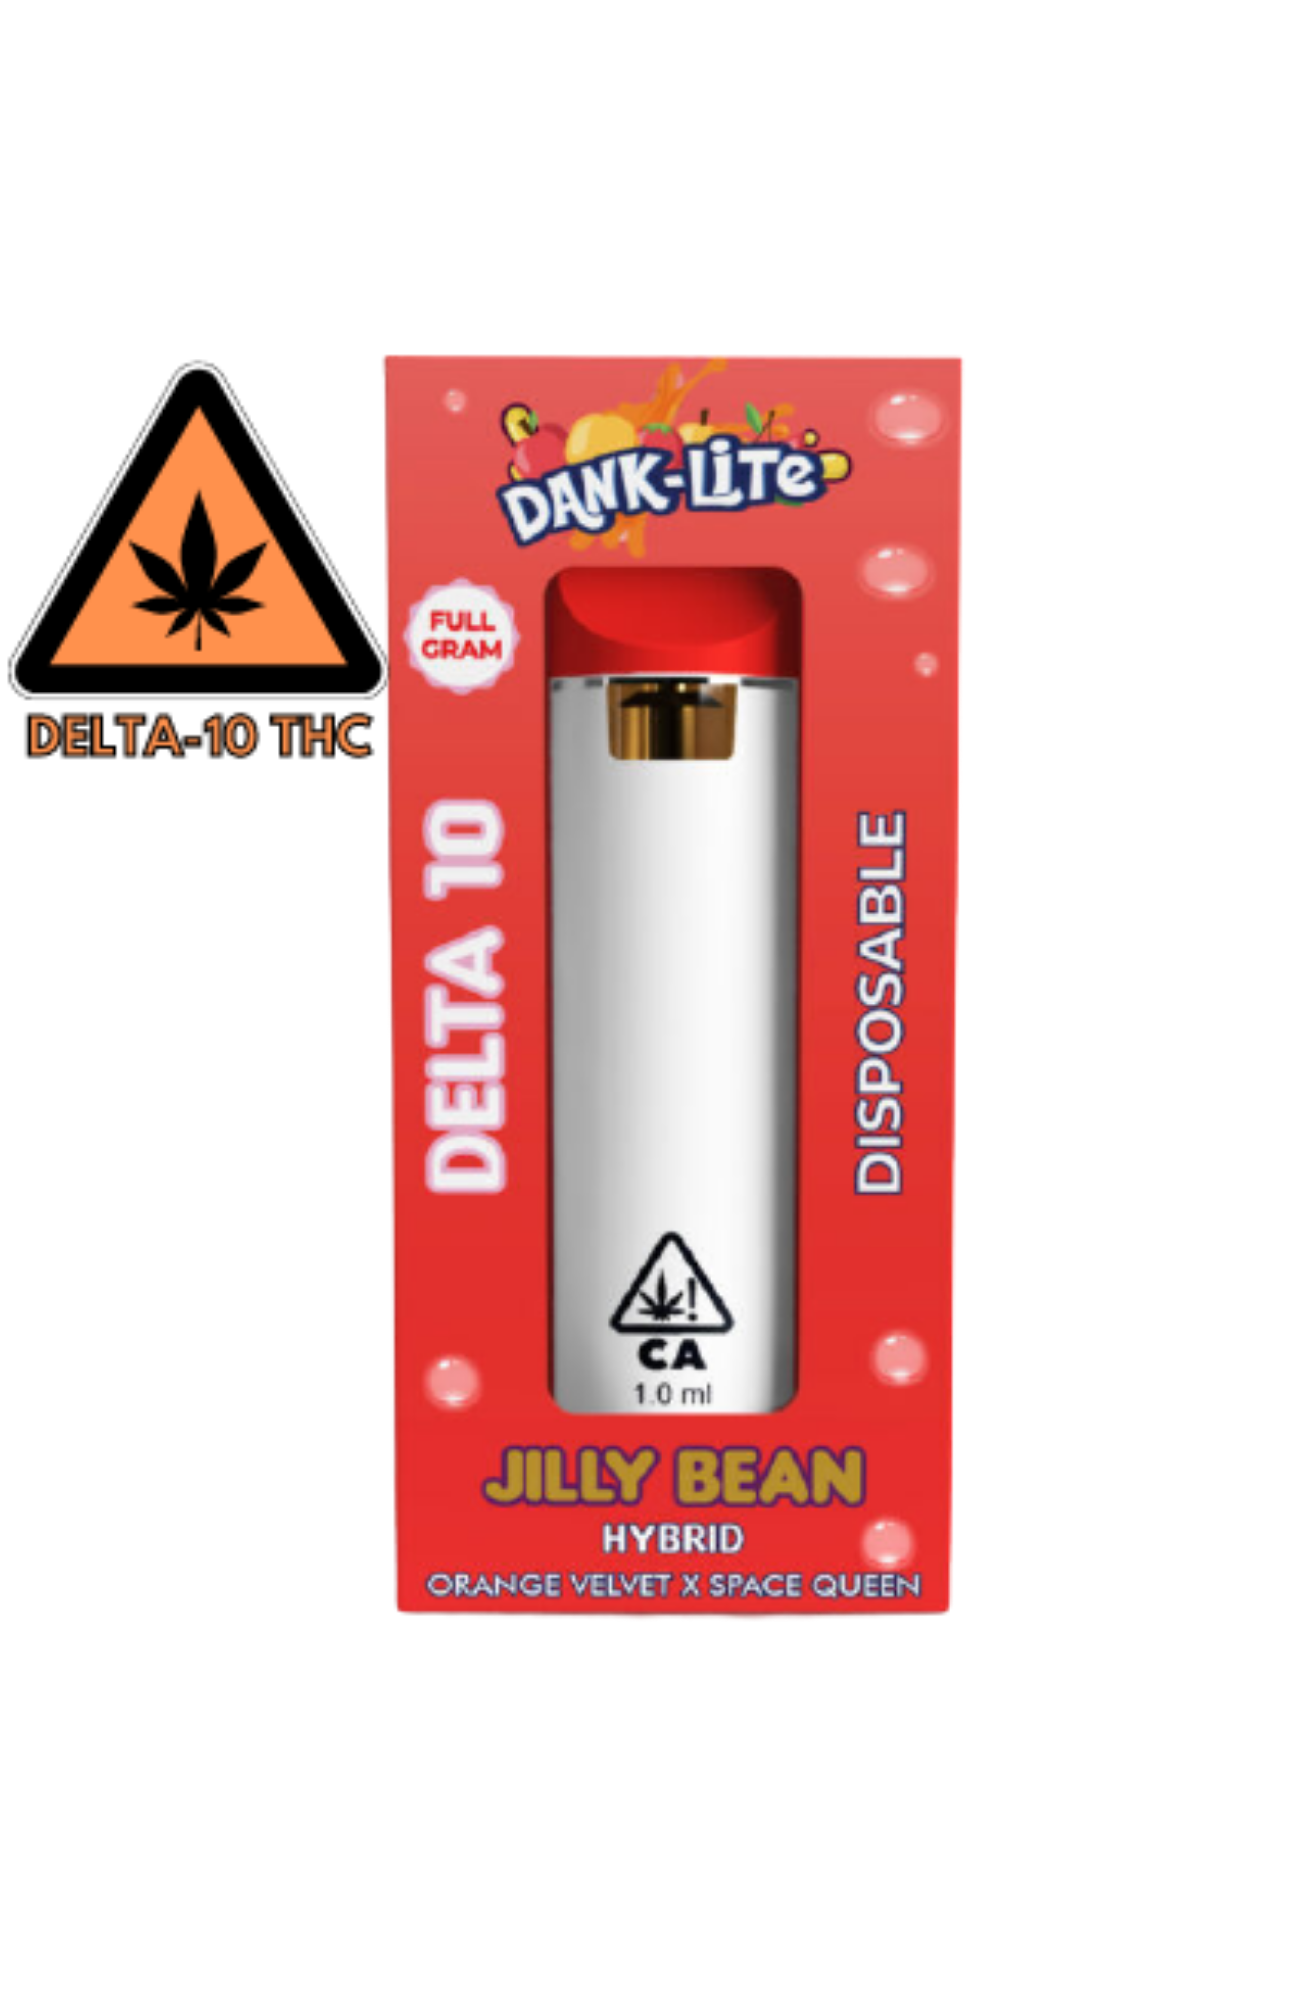 Mellow Fellow Delta 10 Thc Cartridge - Thc|Delta|Products|Delta-10|Effects|Cbd|Cannabis|Cannabinoids|Cannabinoid|Hemp|Oil|Body|Benefits|Pain|Drug|Inflammation|People|Receptors|Gummies|Arthritis|Market|Product|Marijuana|Delta-8|Research|States|Cb1|Test|Strains|Effect|Vape|Experience|Users|Time|Compound|System|Way|Anxiety|Plants|Chemical|Delta-10 Thc|Delta-9 Thc|Cbd Oil|Drug Test|Delta-10 Products|Side Effects|Delta-8 Thc|Cb1 Receptors|Cb2 Receptors|Cannabis Plants|Endocannabinoid System|Minor Discomfort|Medical Marijuana|Thc Products|Psychoactive Effects|Arthritic Symptoms|New Cannabinoid|Fusion Farms|Arthritic Patients|Conclusion Delta|Medical Cannabis Oil|Arthritis Pain|Good Fit|Double Bond|Anticonvulsant Actions|Medical Benefit|Anticonvulsant Properties|Epileptic Children|User Guide|Farm Bill